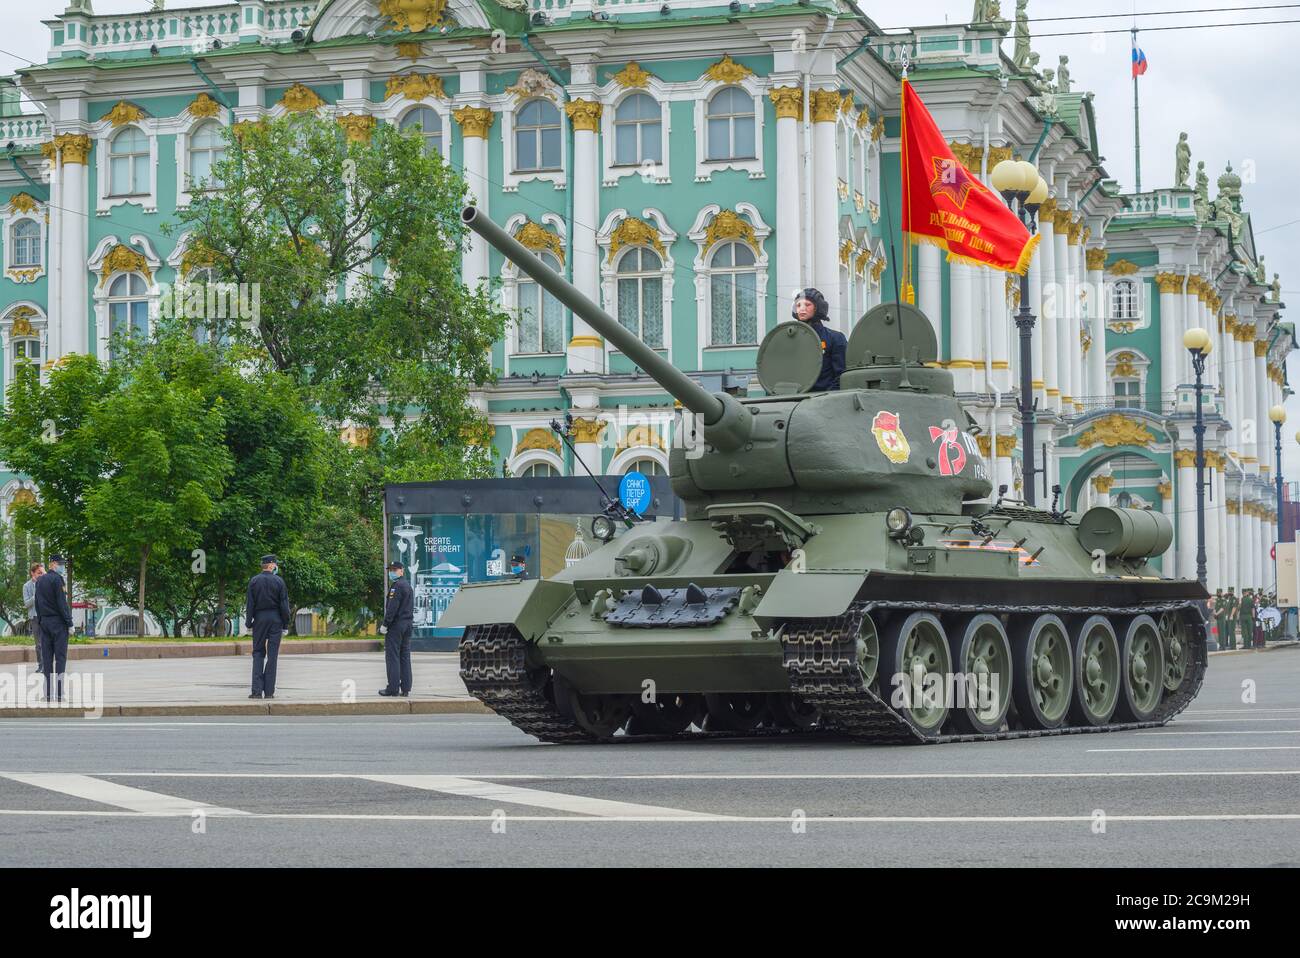 ST. PETERSBURG, RUSSIA - JUNE 20, 2020: Soviet T-34 tank against the background of the Winter Palace. Rehearsal of the military parade in honor of Vic Stock Photo